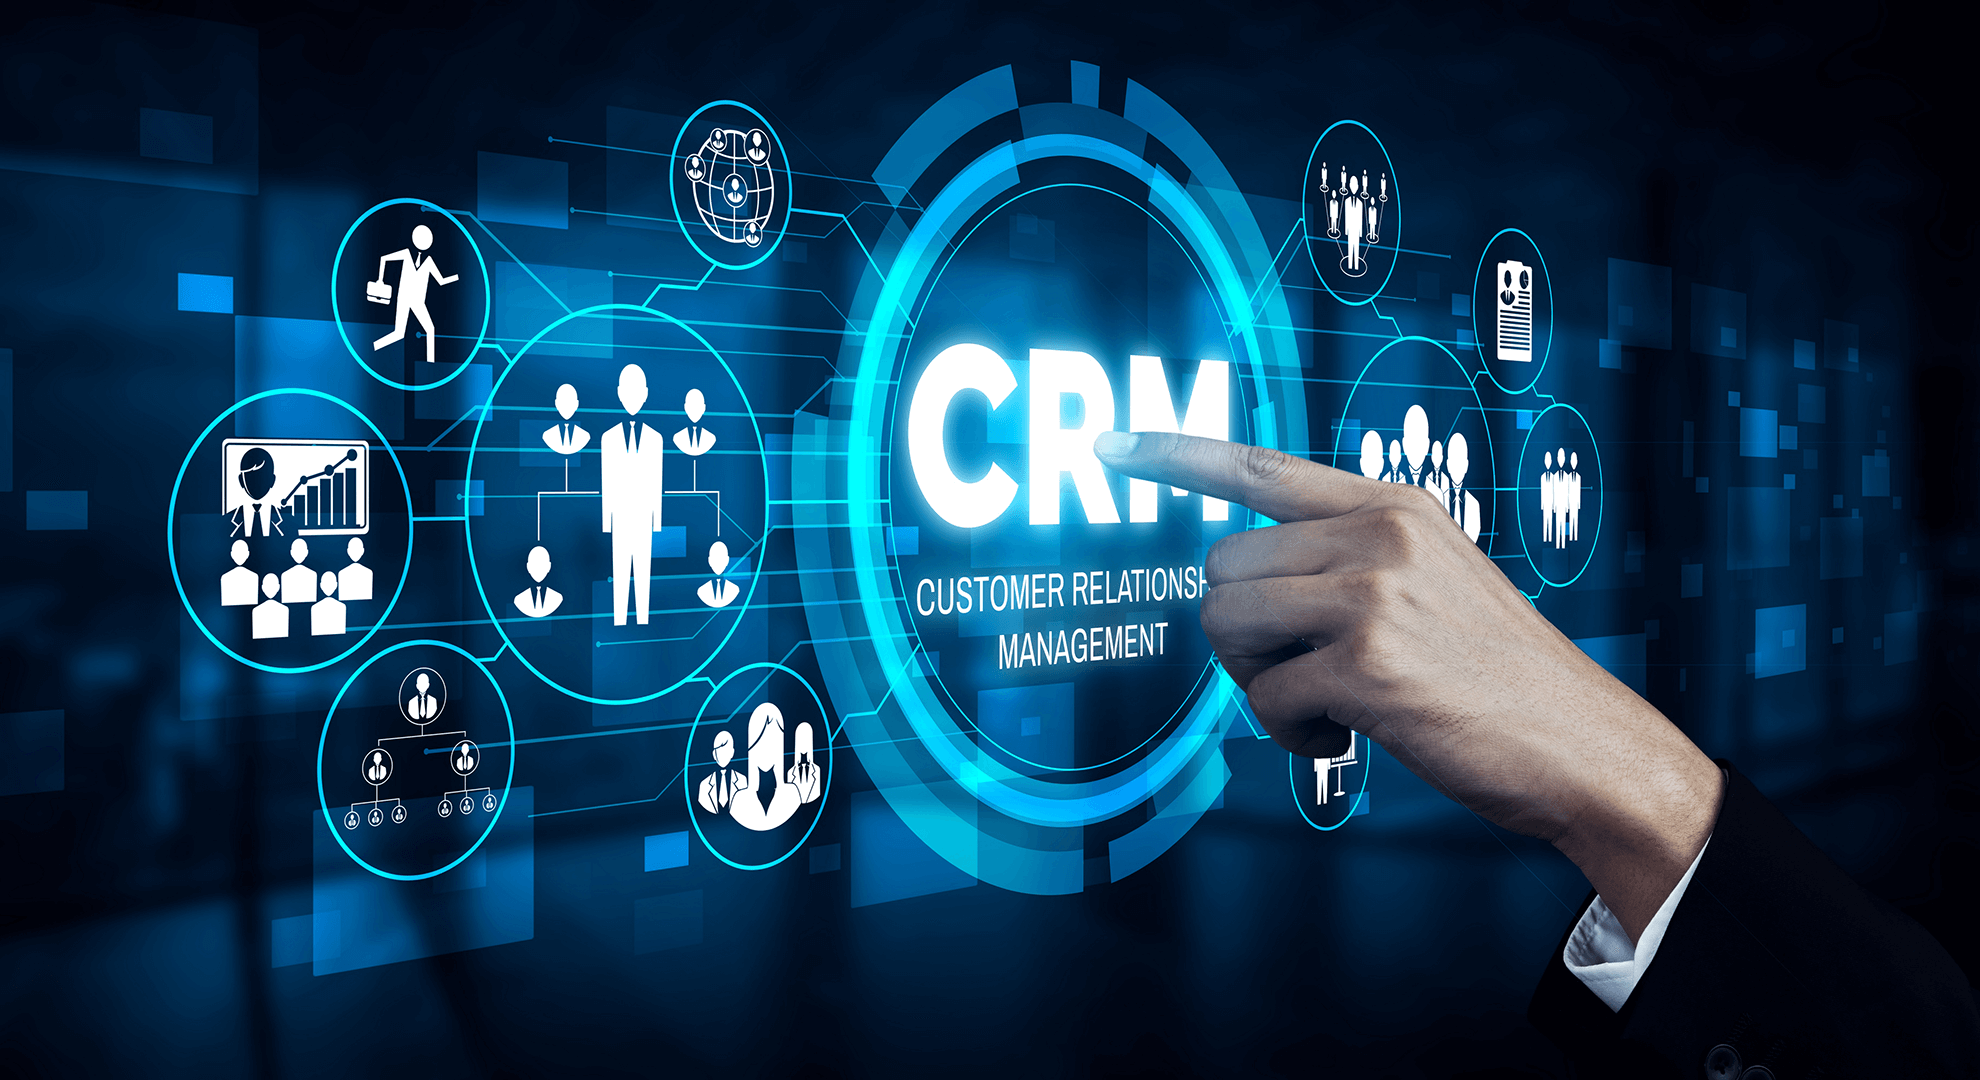 the future of crm